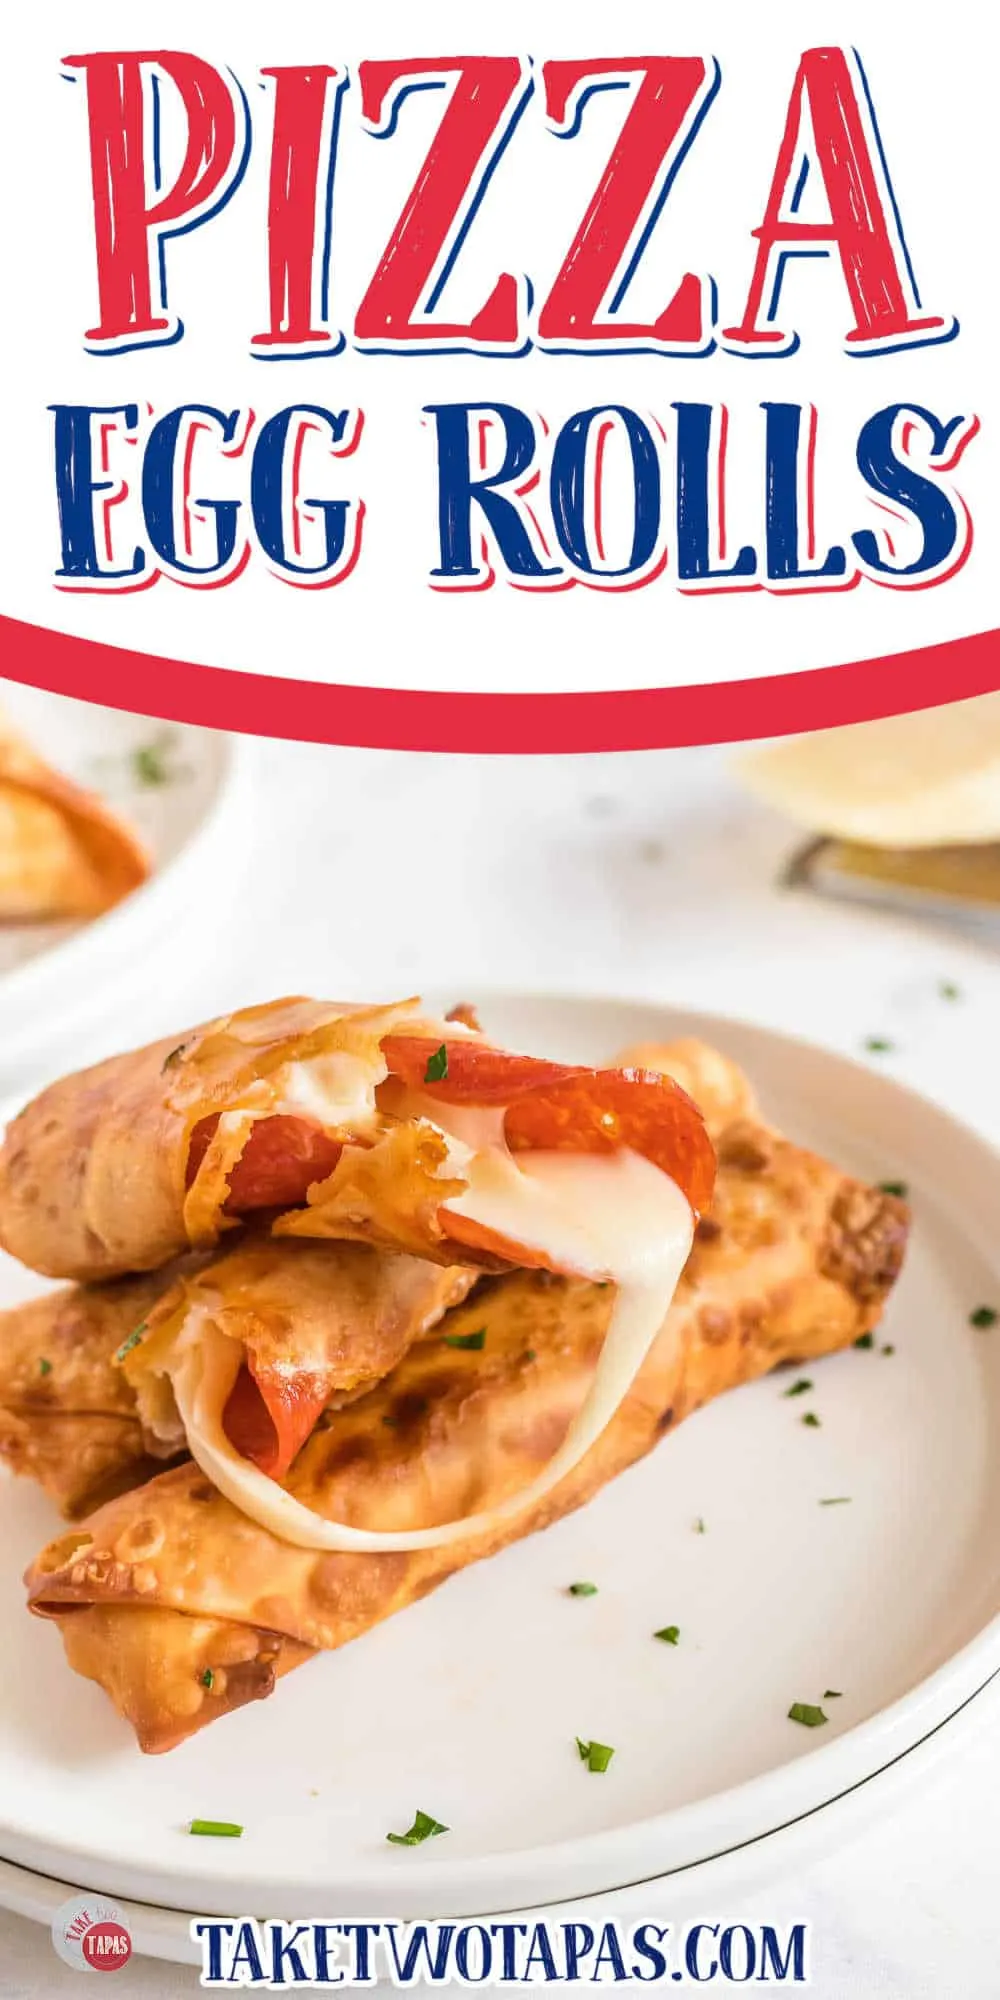 plate of pizza egg rolls broken open and cheese melting out